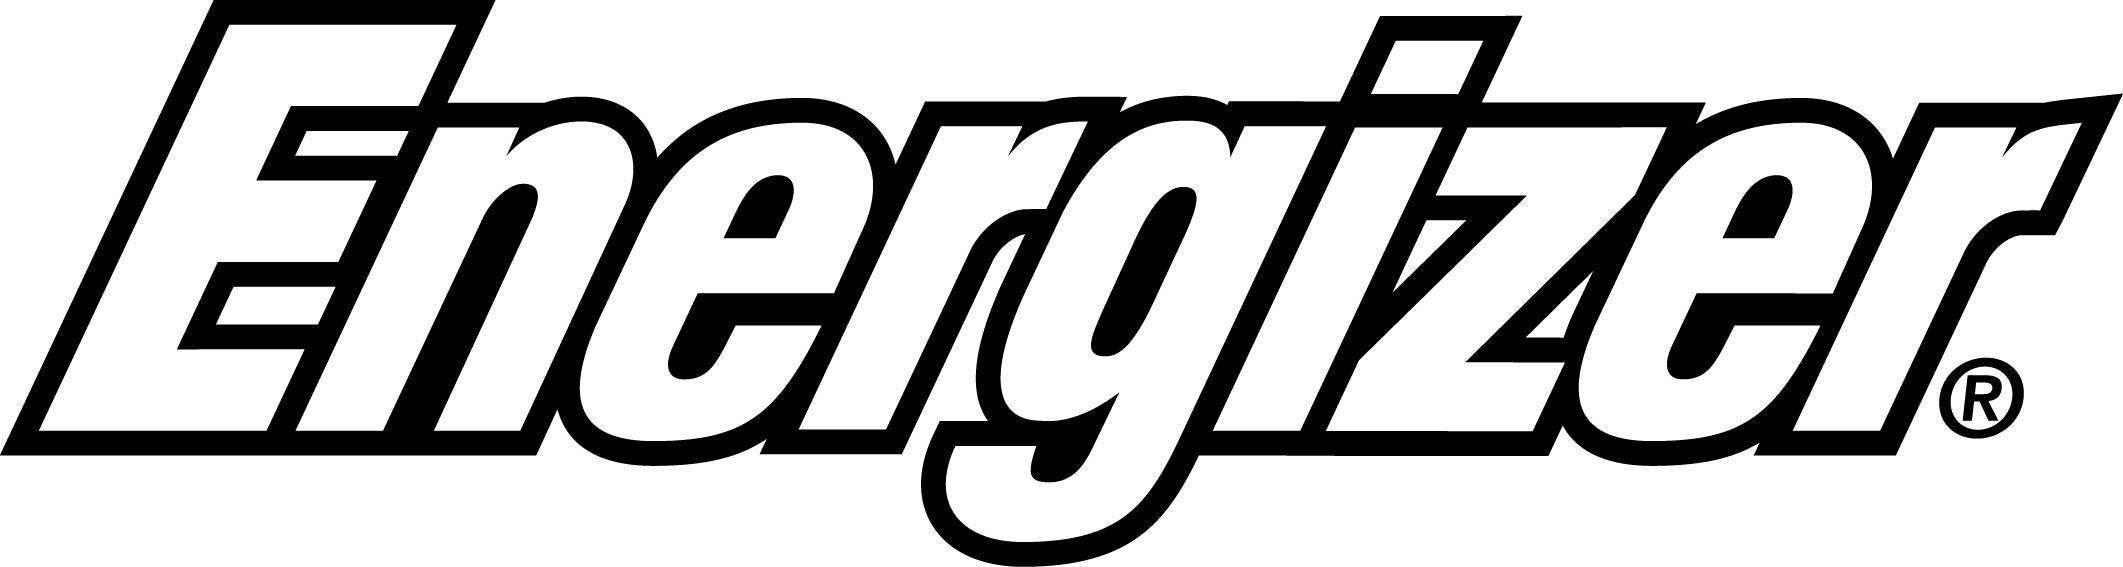 Avenir Telecom, A French Company, Has Forayed Into Indian Market And Launched Today Range - Energizer, Transparent background PNG HD thumbnail